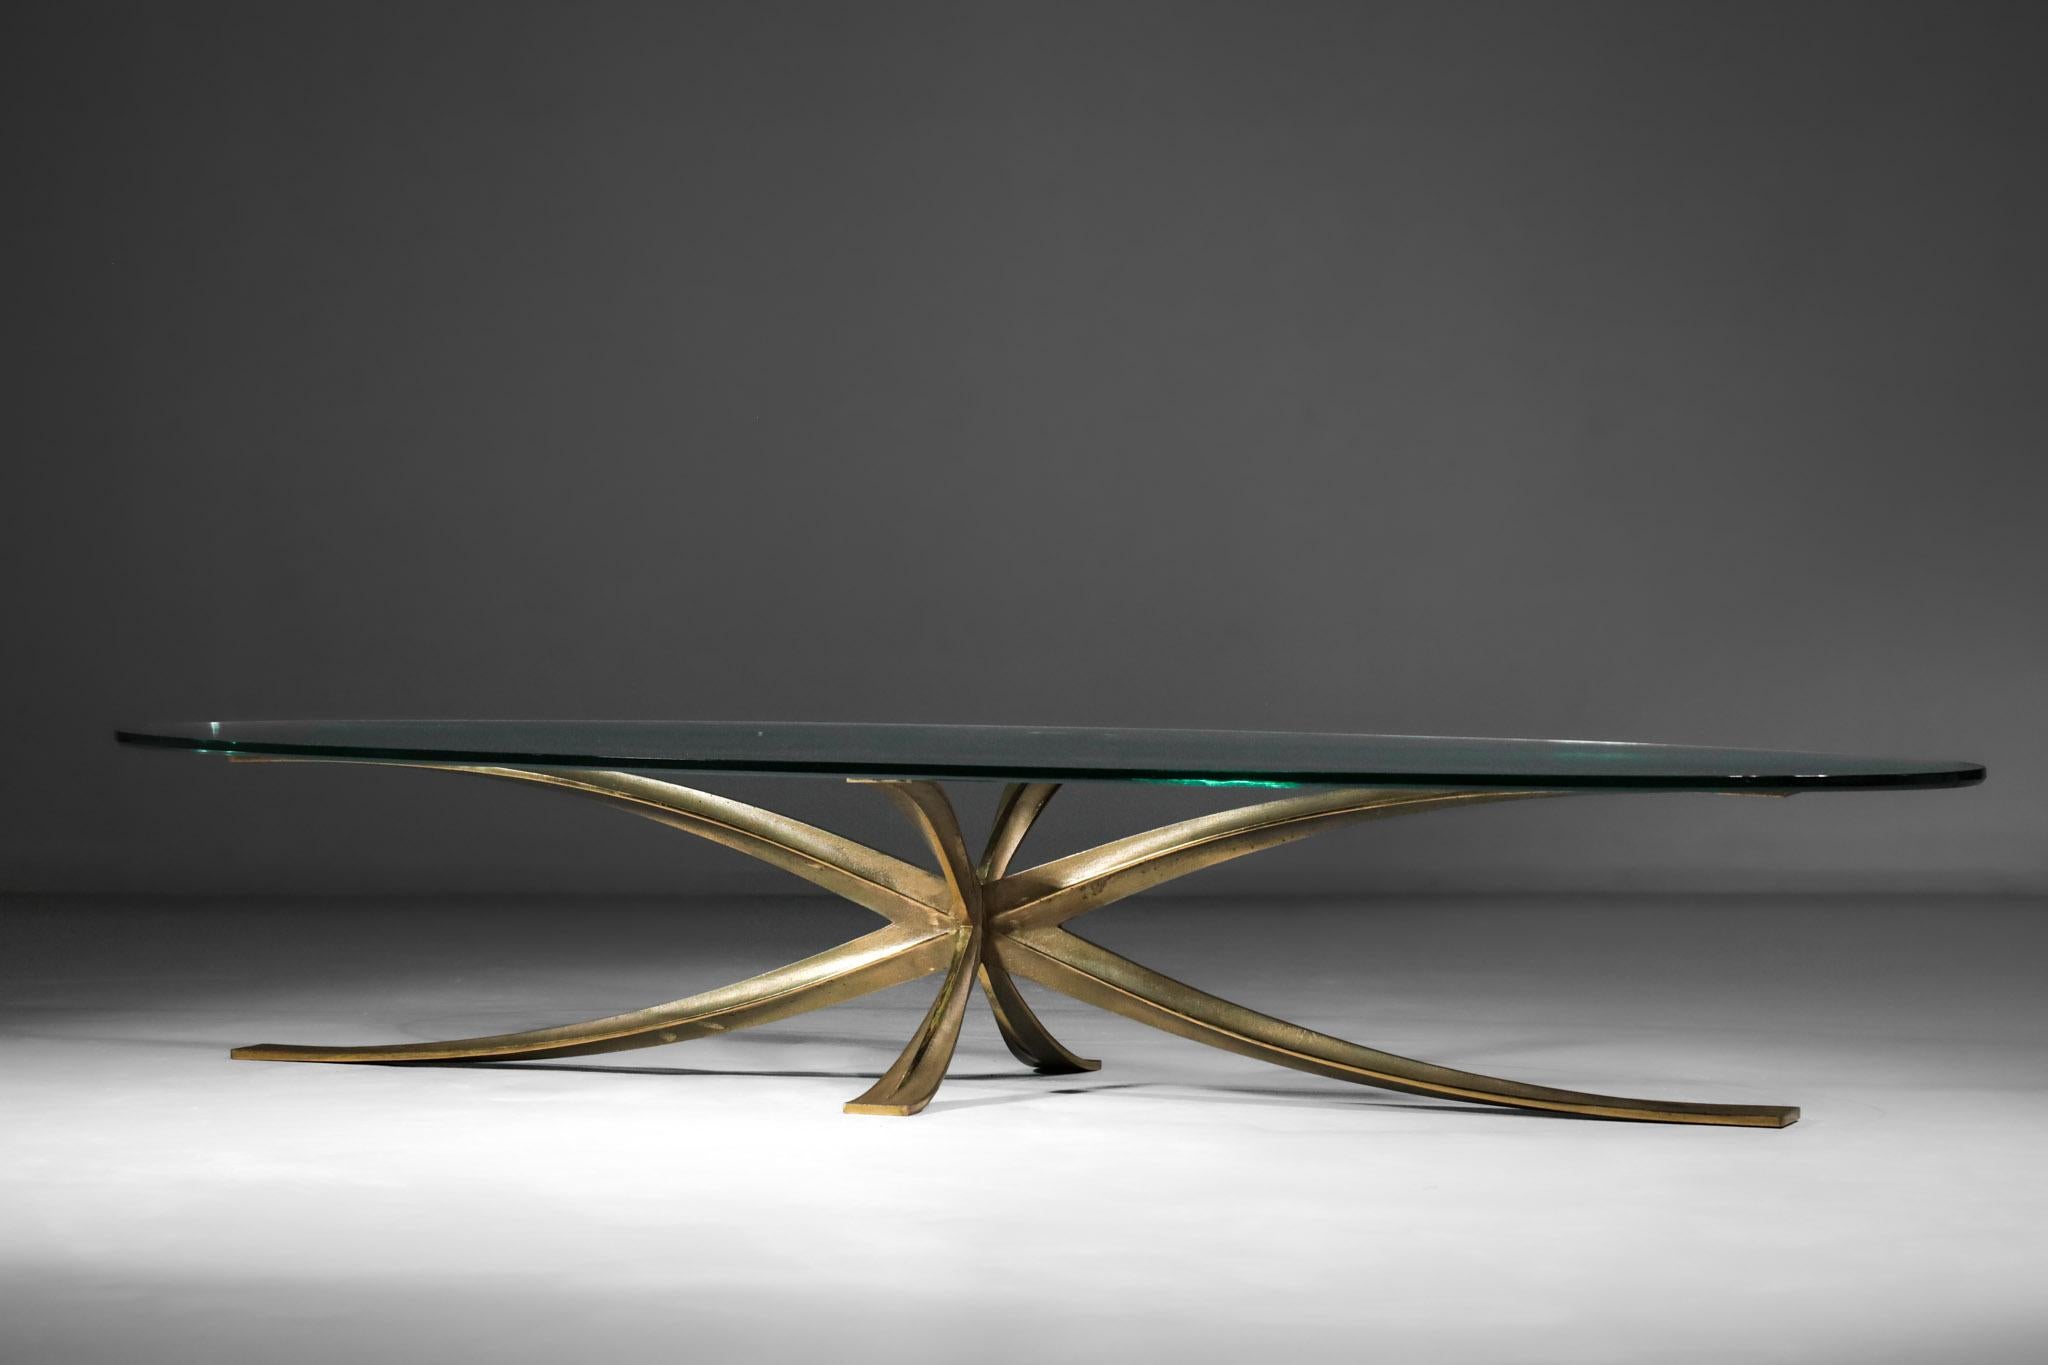 Large Michel Mangematin Coffee Table in Gilt Bronze and Oval Glass 1960's Design For Sale 8